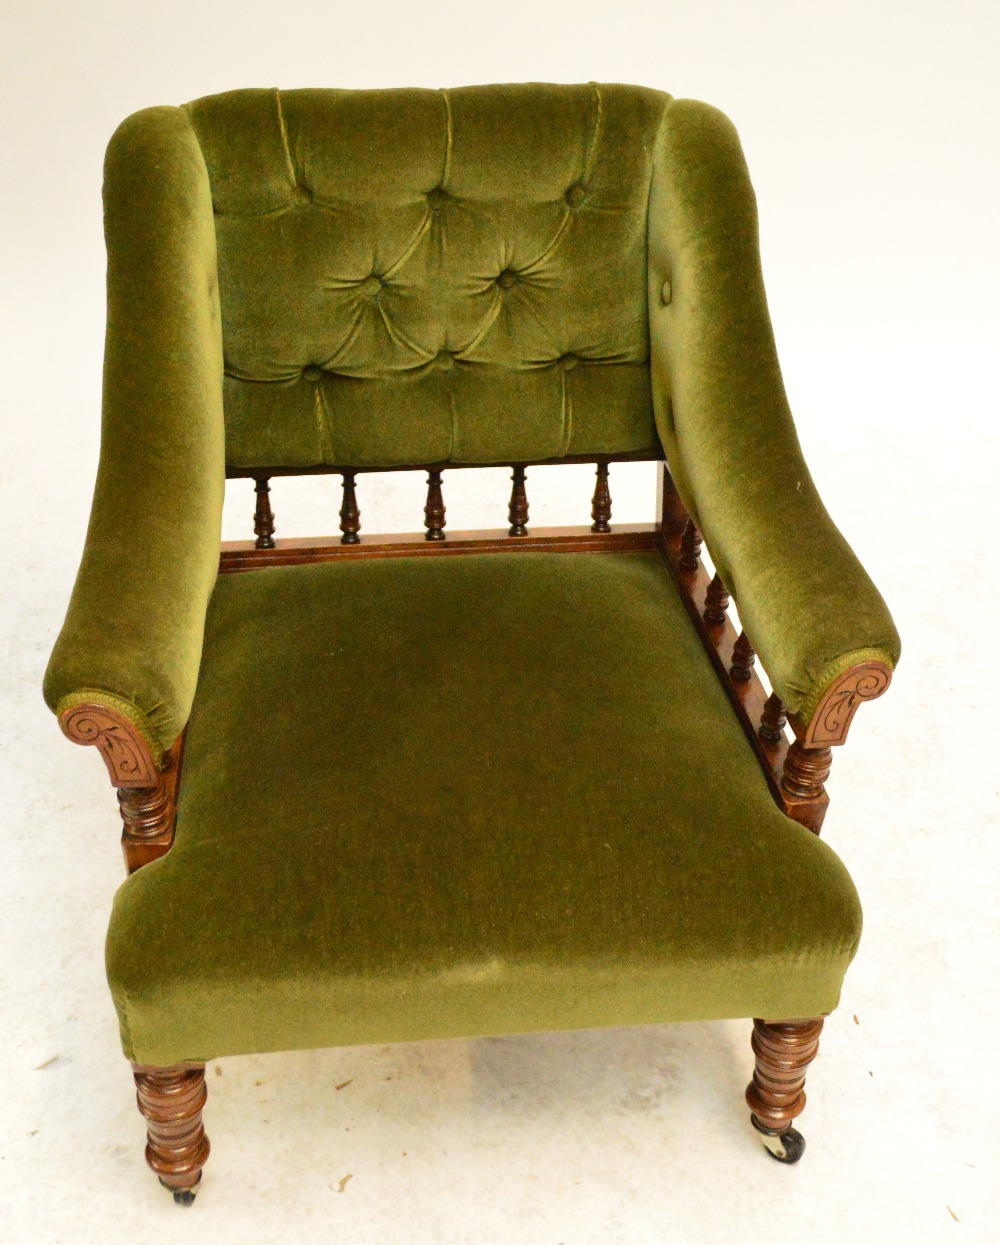 A Victorian walnut framed upholstered gentleman's chair with buttoned and spindle decorated back